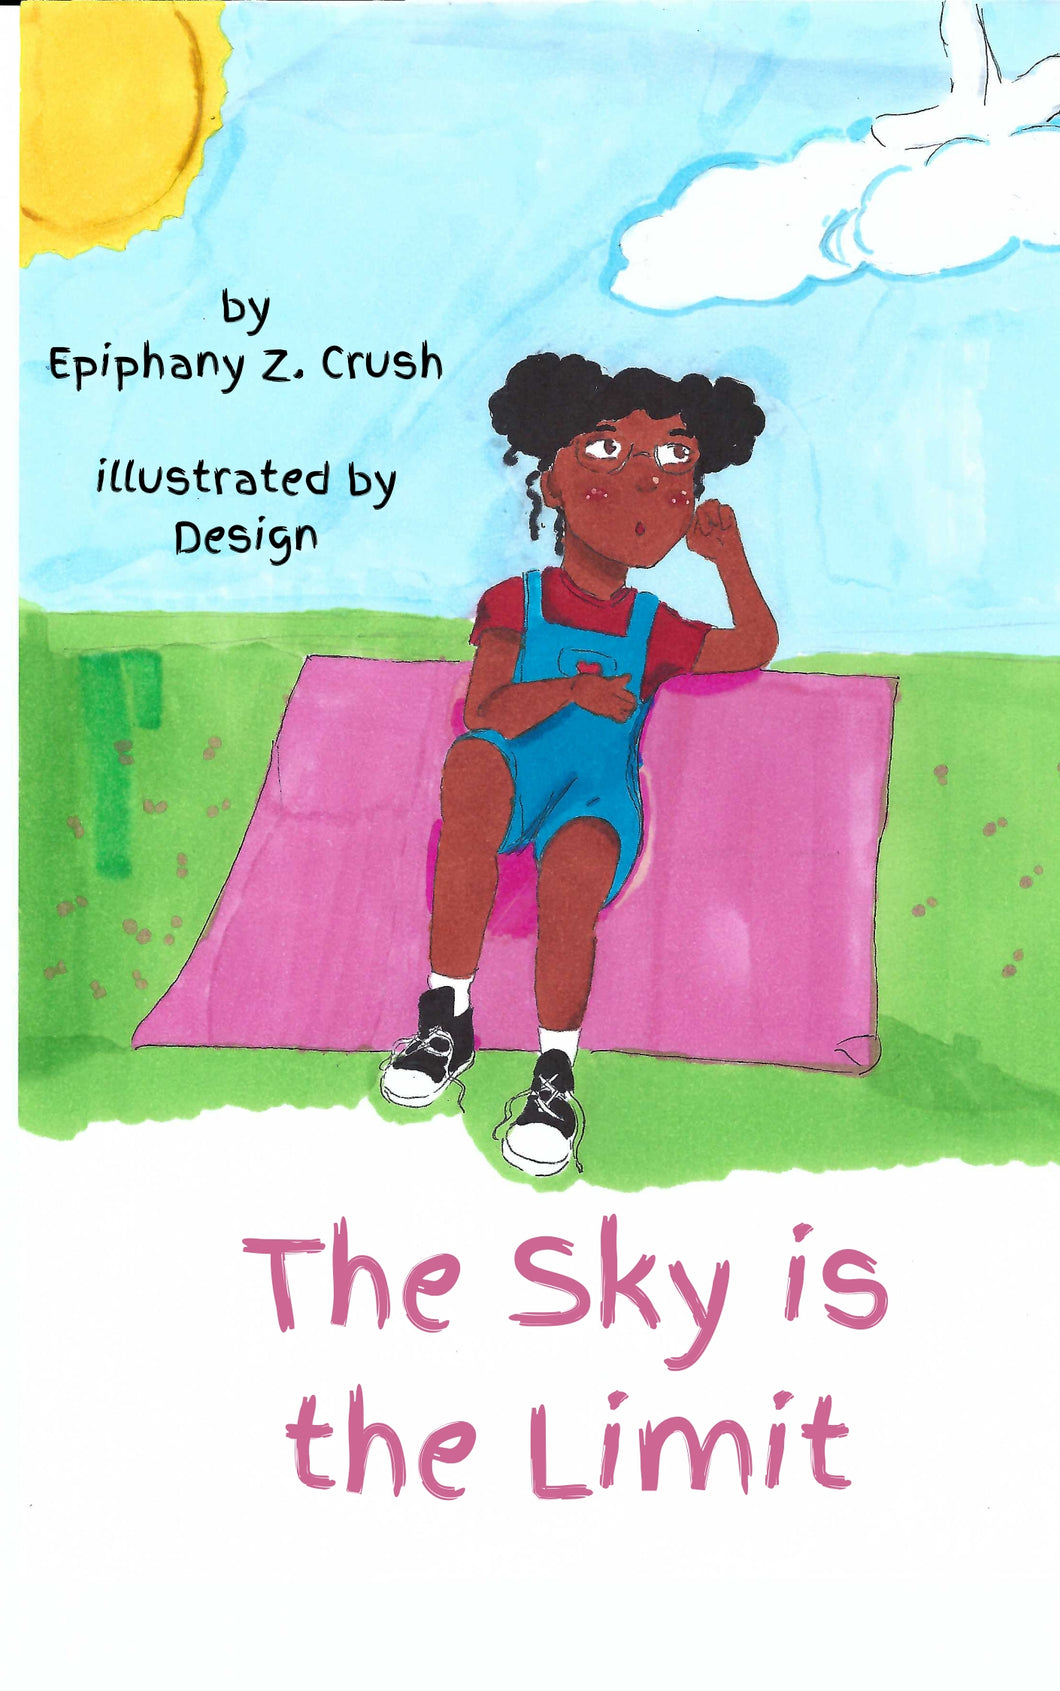 Books: The Sky is the Limit